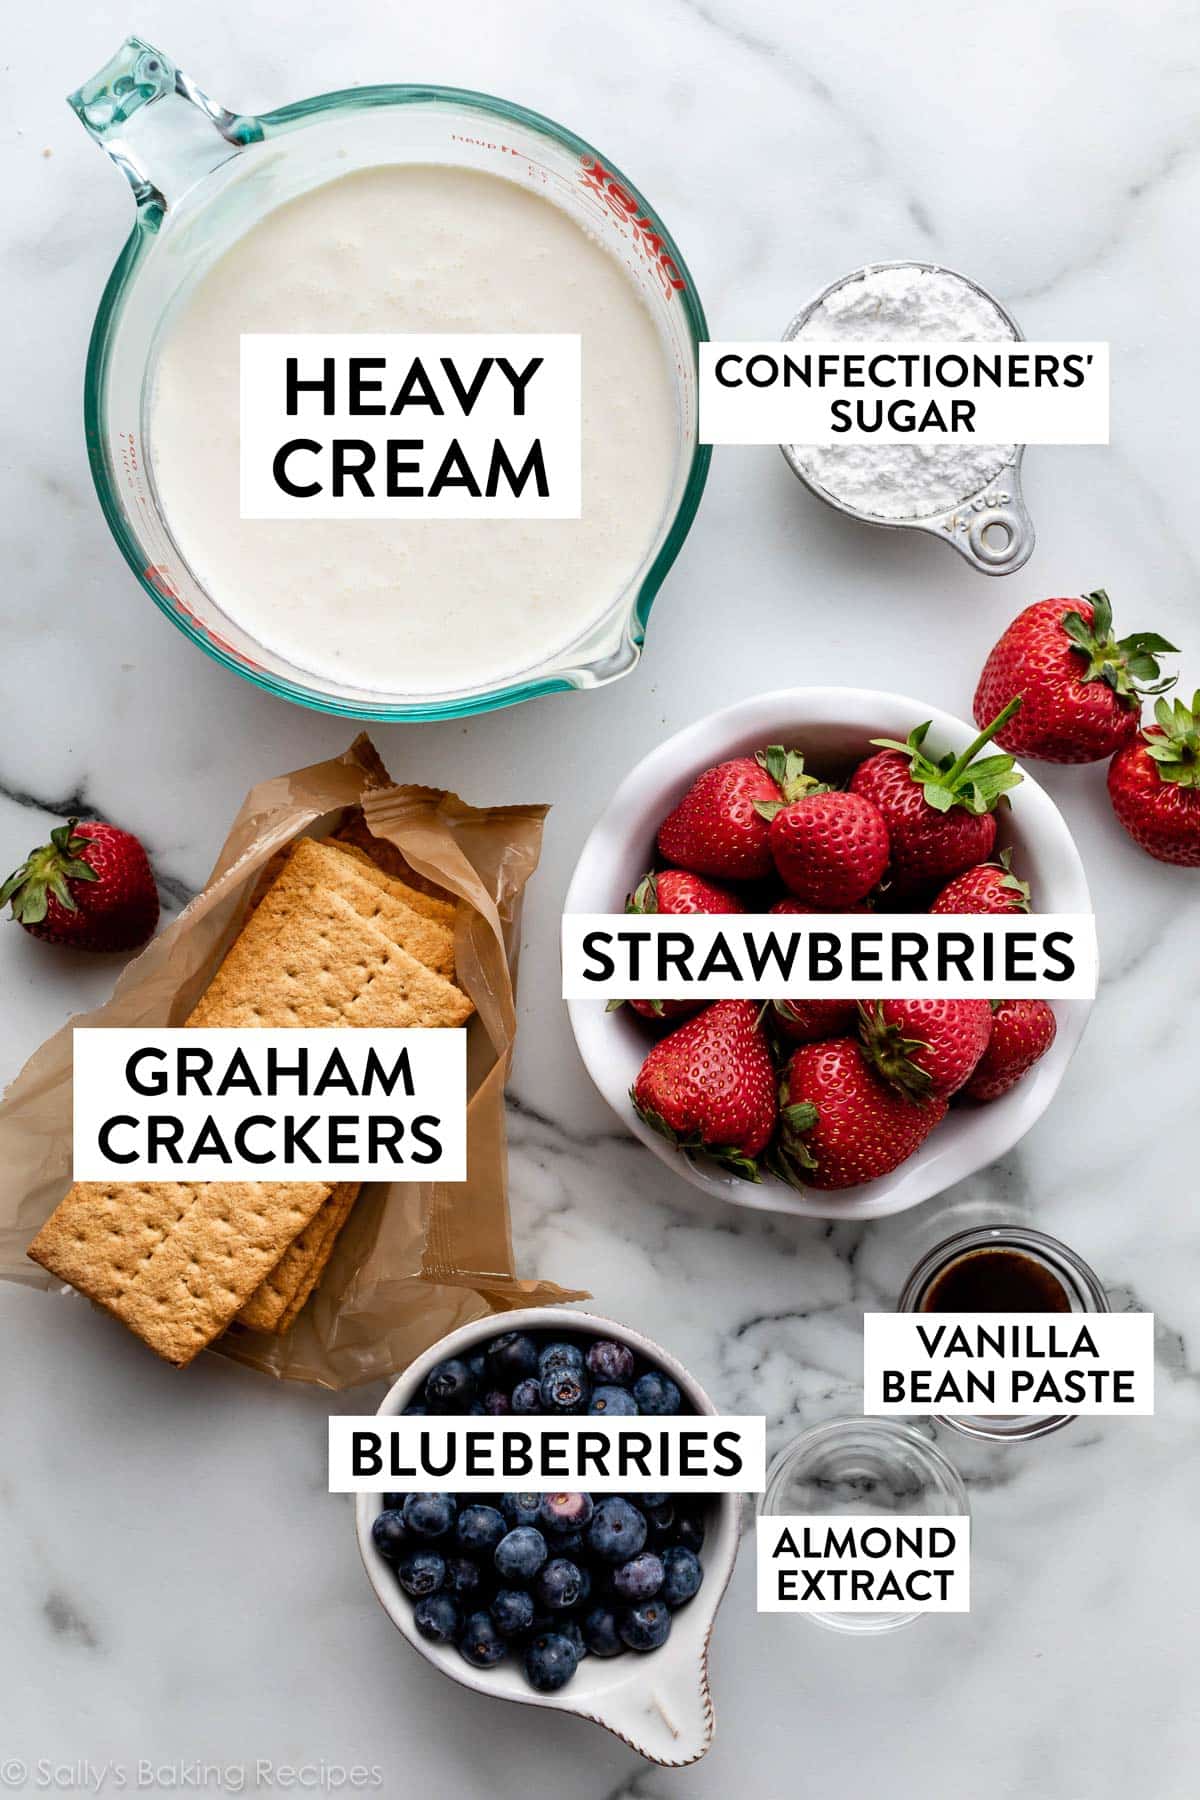 ingredients on marble counter including vanilla bean paste, graham crackers, blueberries, strawberries, heavy cream, and confectioners' sugar.